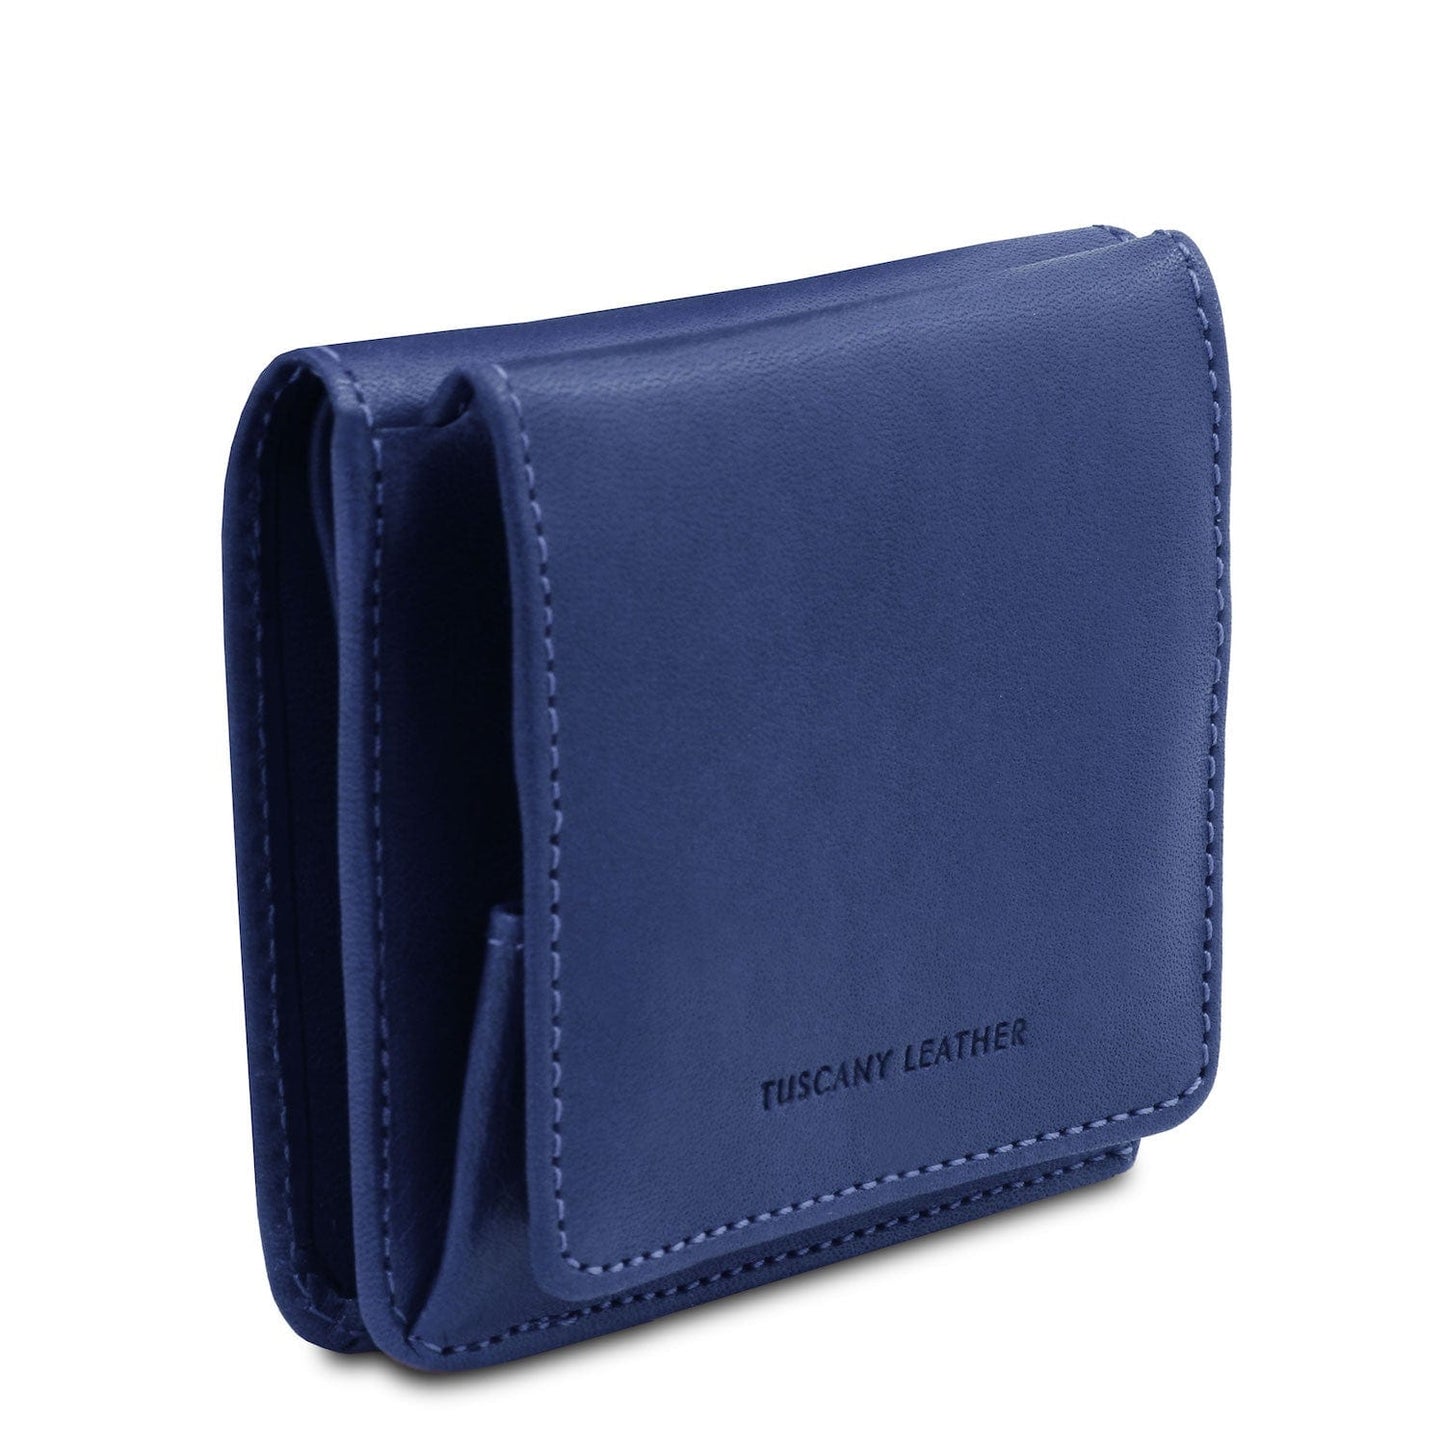 Exclusive leather wallet with coin pocket | TL142059 - Premium Leather wallets for women - Shop now at San Rocco Italia